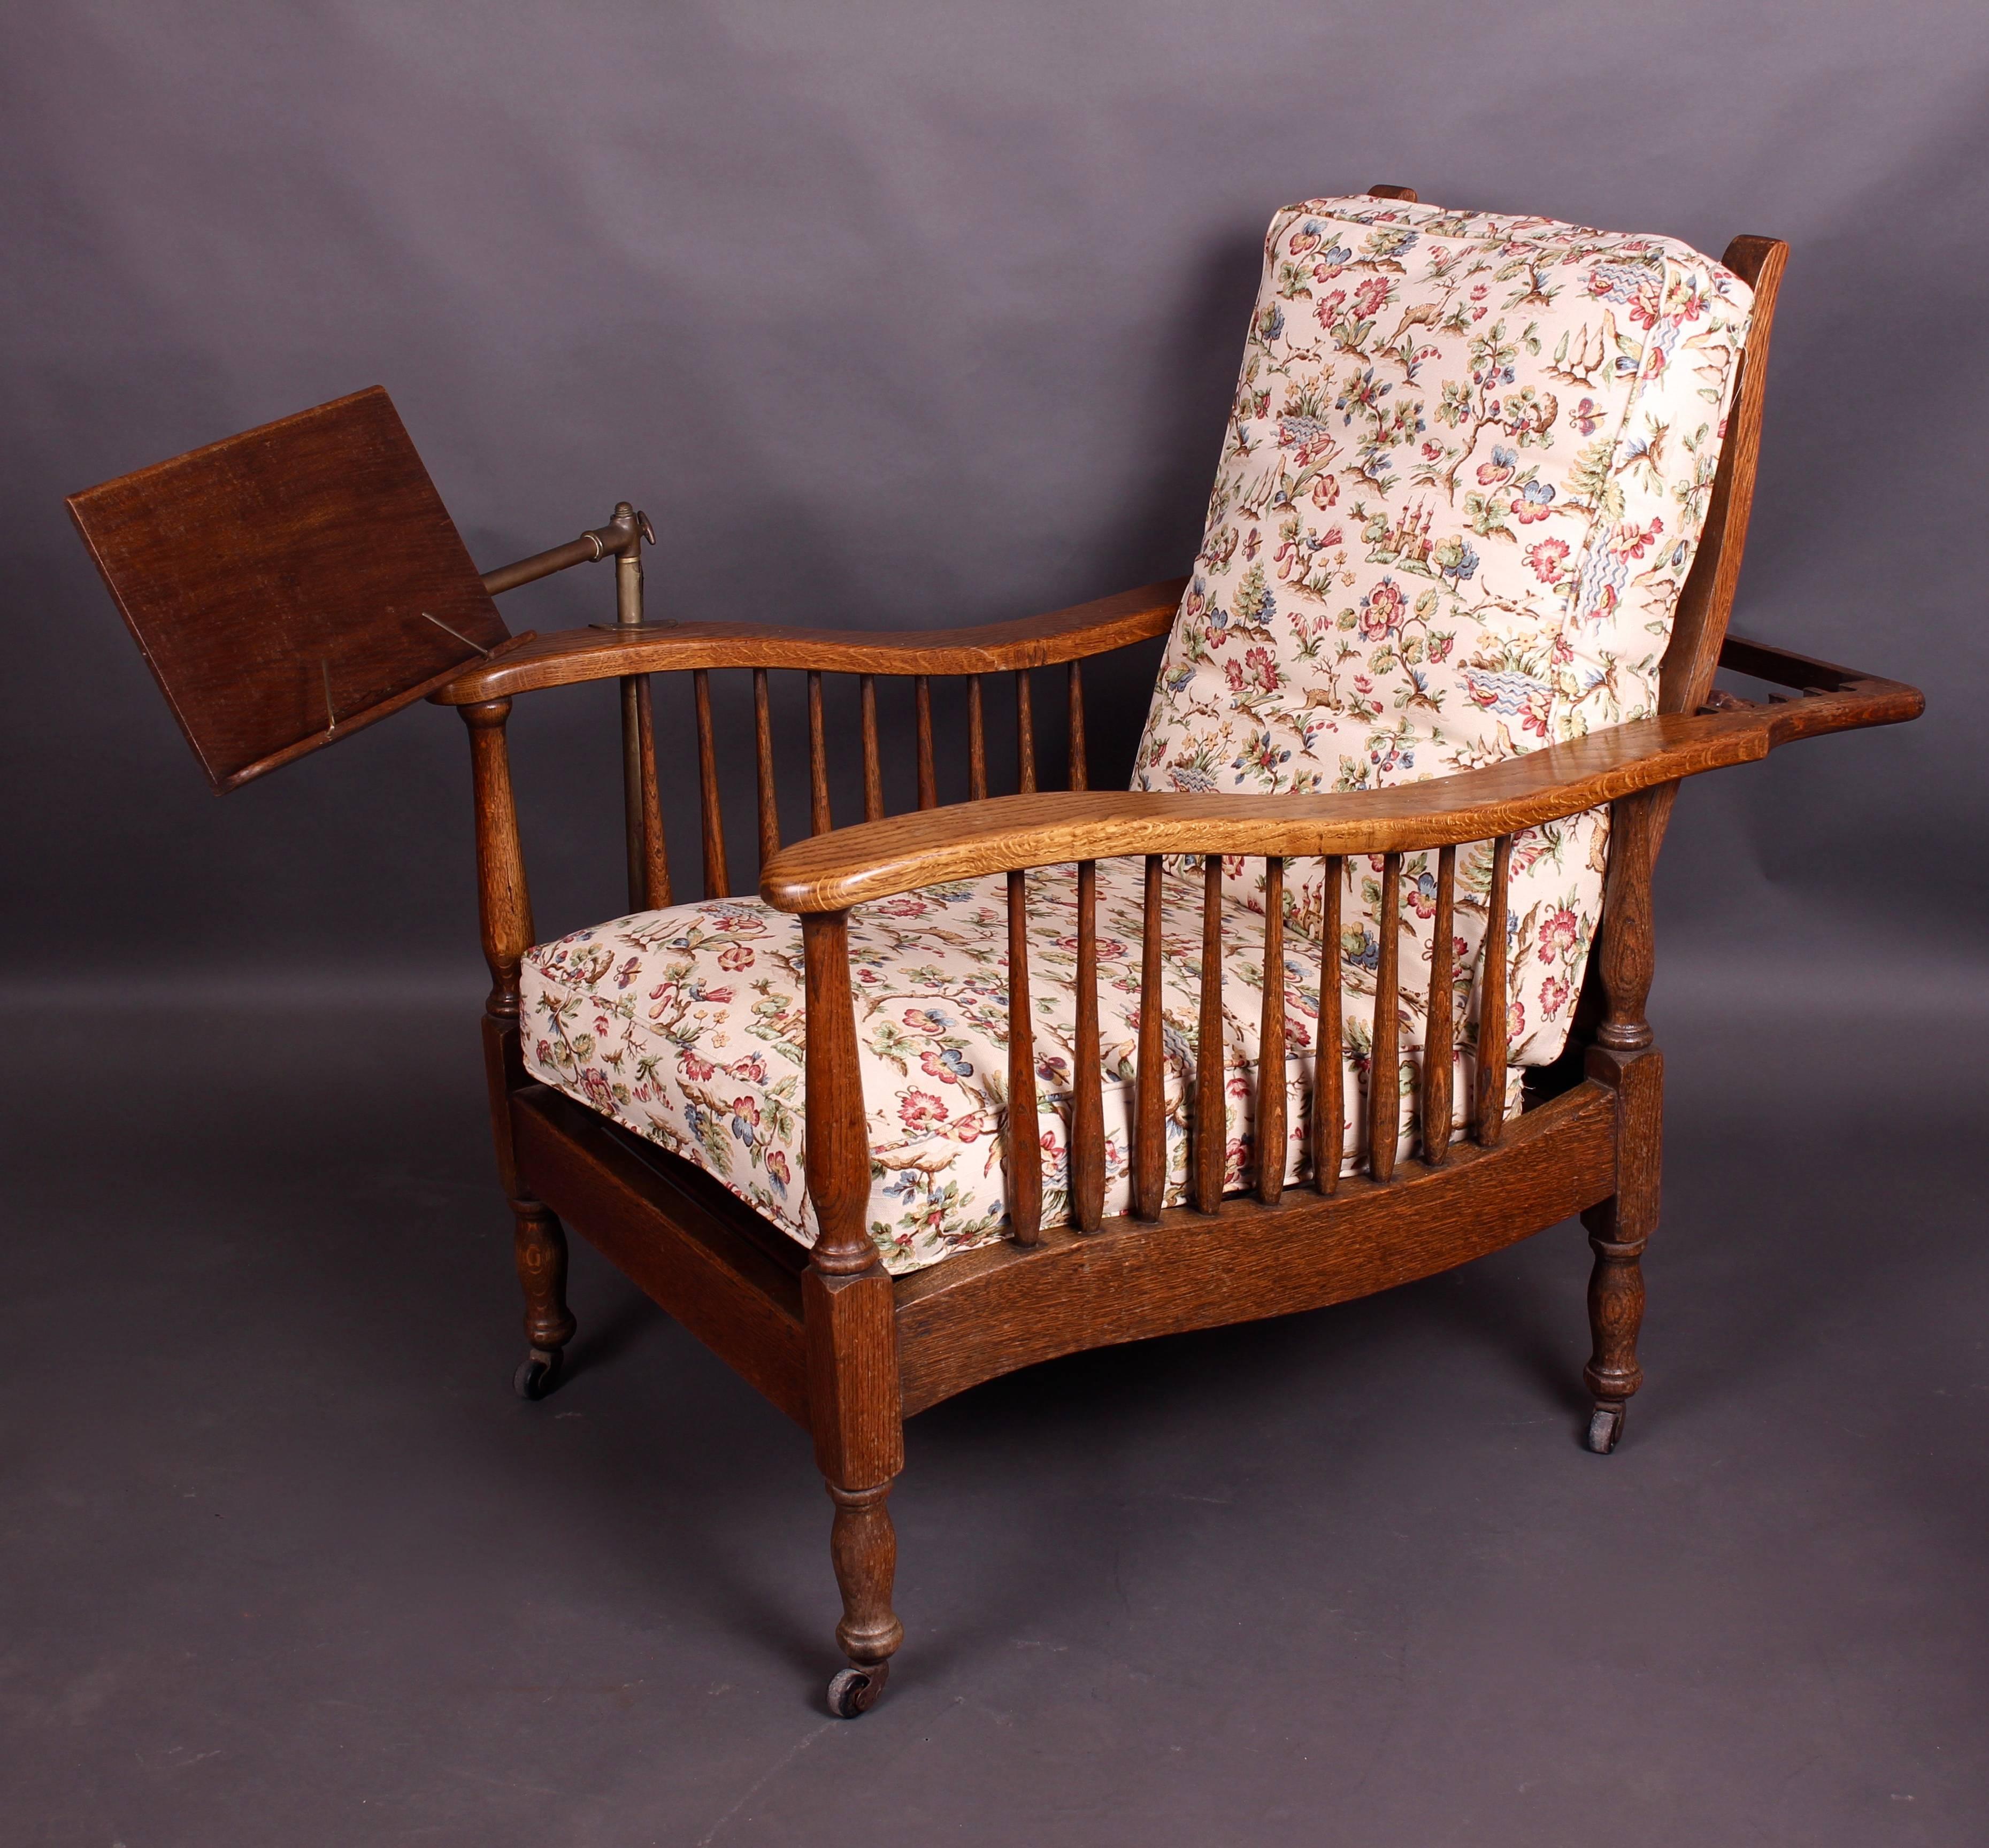 20th Century Pair of Edwardian Oak Steamer Chairs, One with a Carters Patent Reading Stand